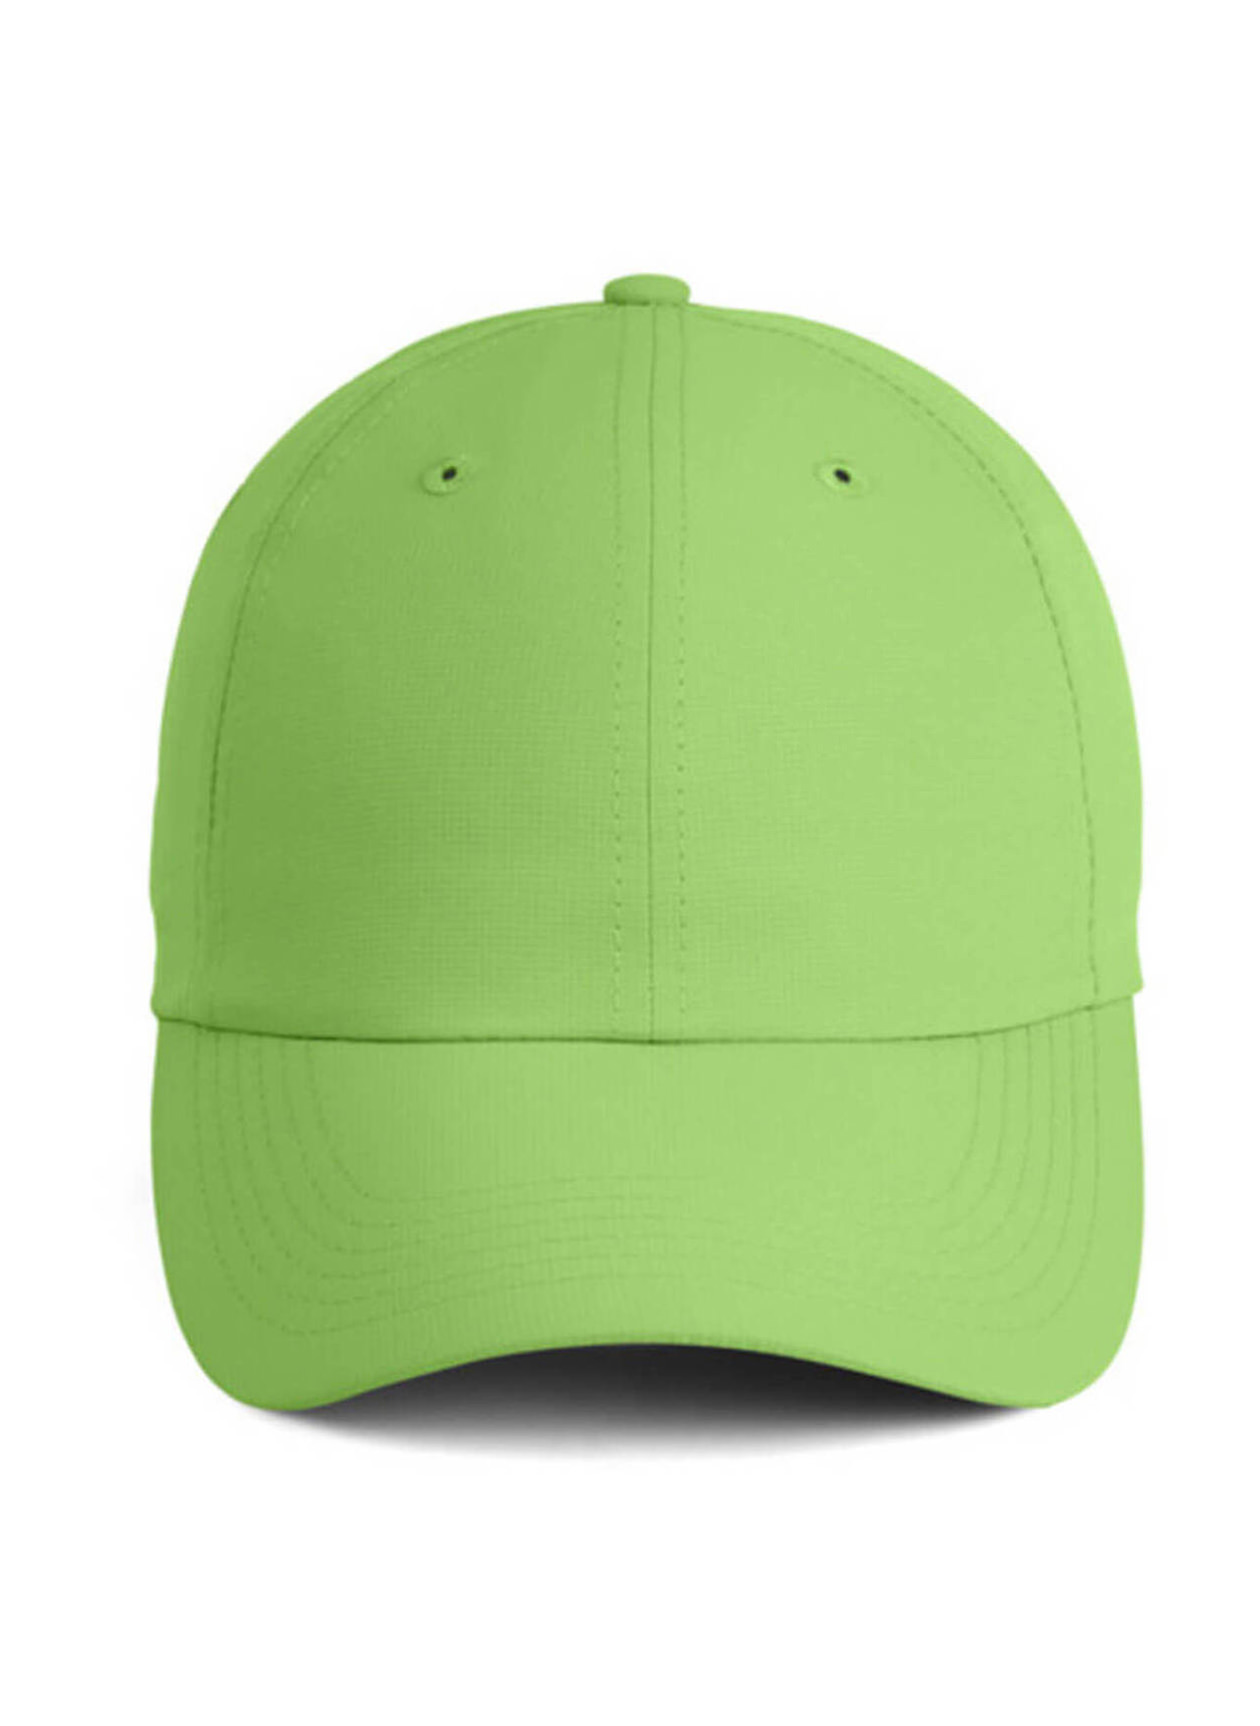 Imperial Lime Original Performance Hat